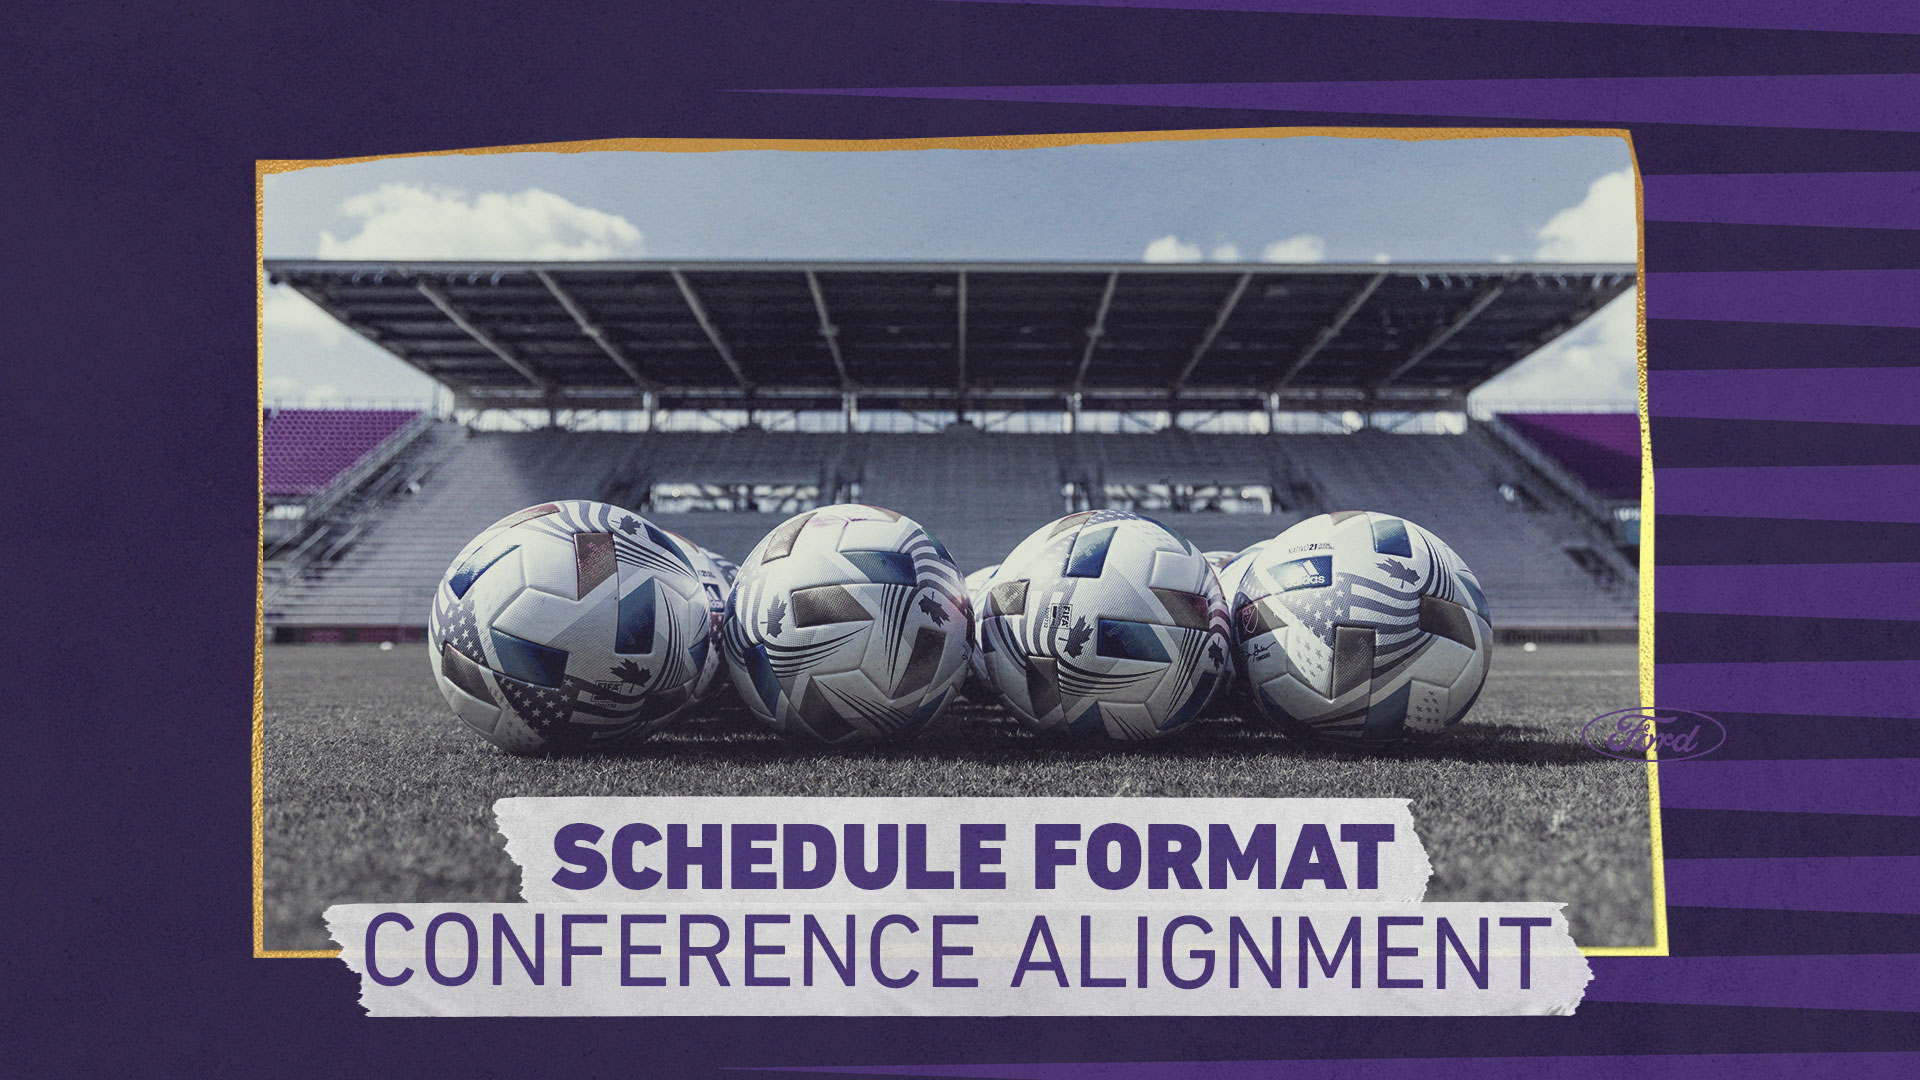 MLS Announces 2022 Schedule Format & Conference Alignment | Orlando City